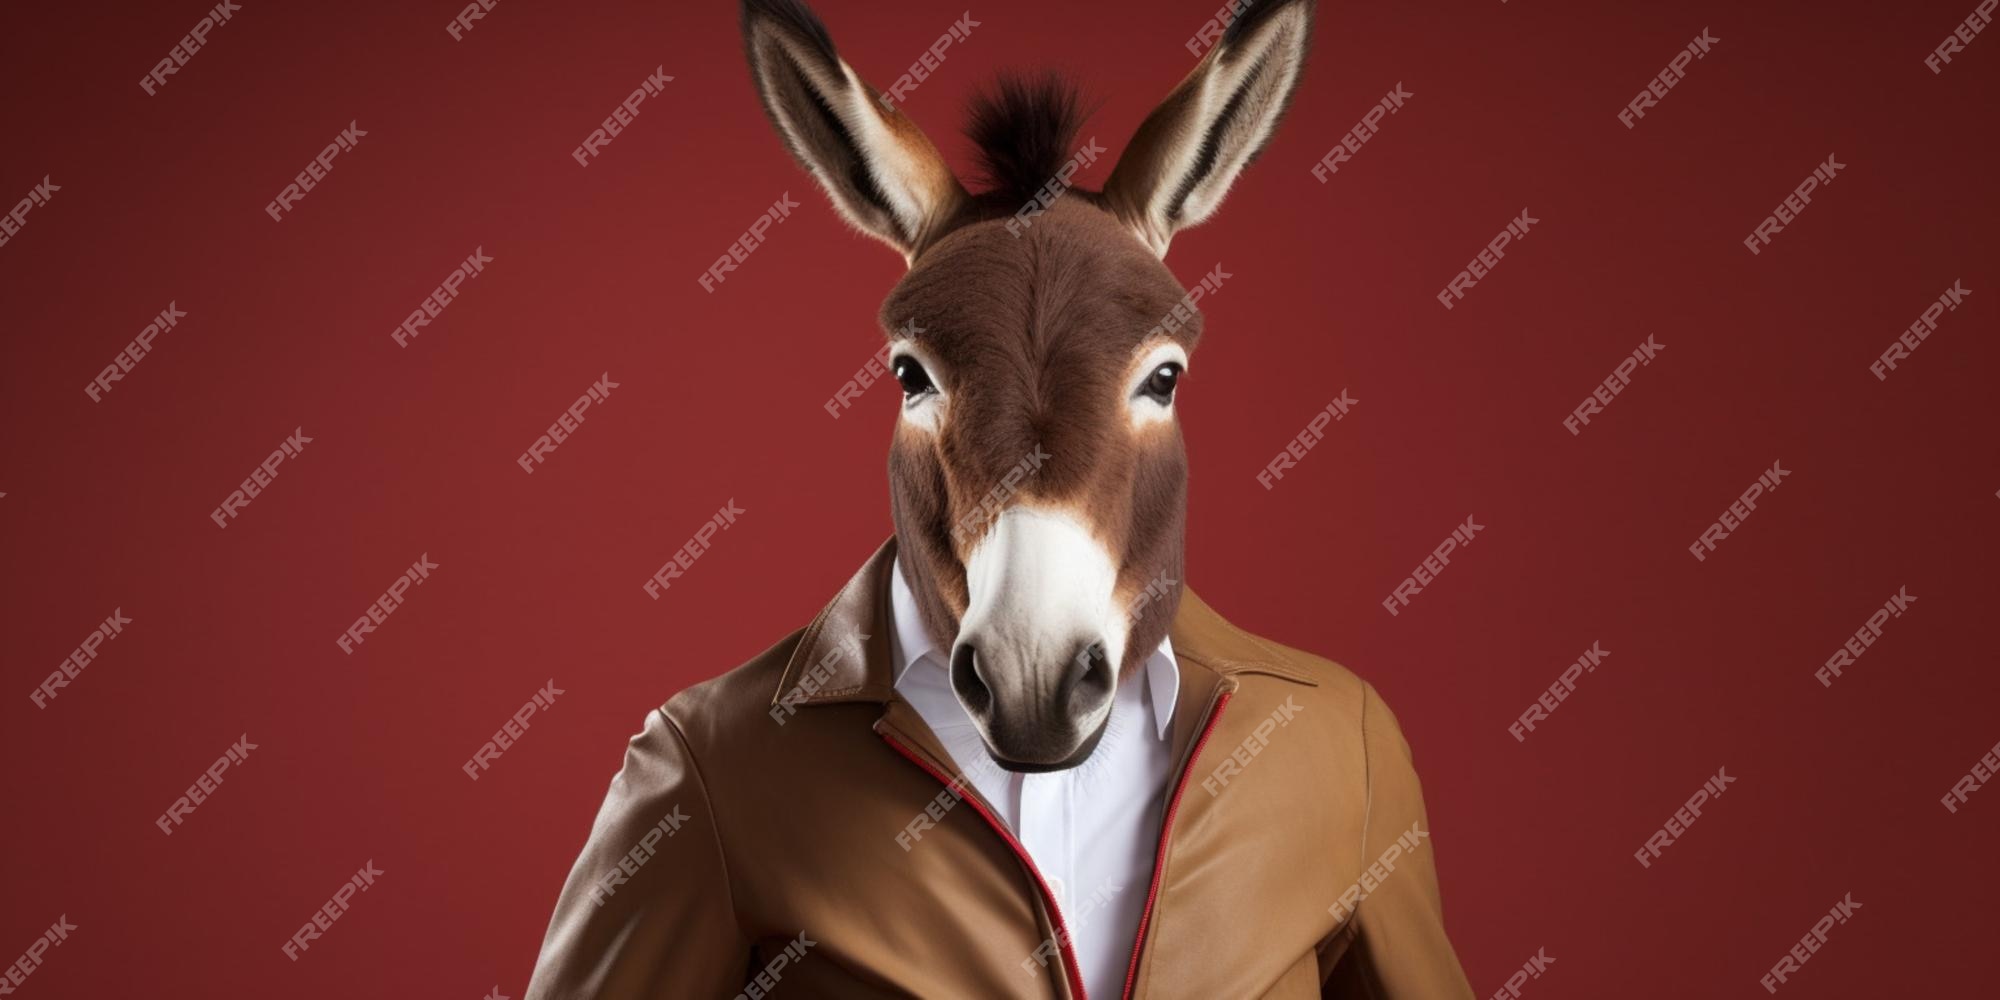 Premium AI Image | A donkey wearing a suit and a jacket